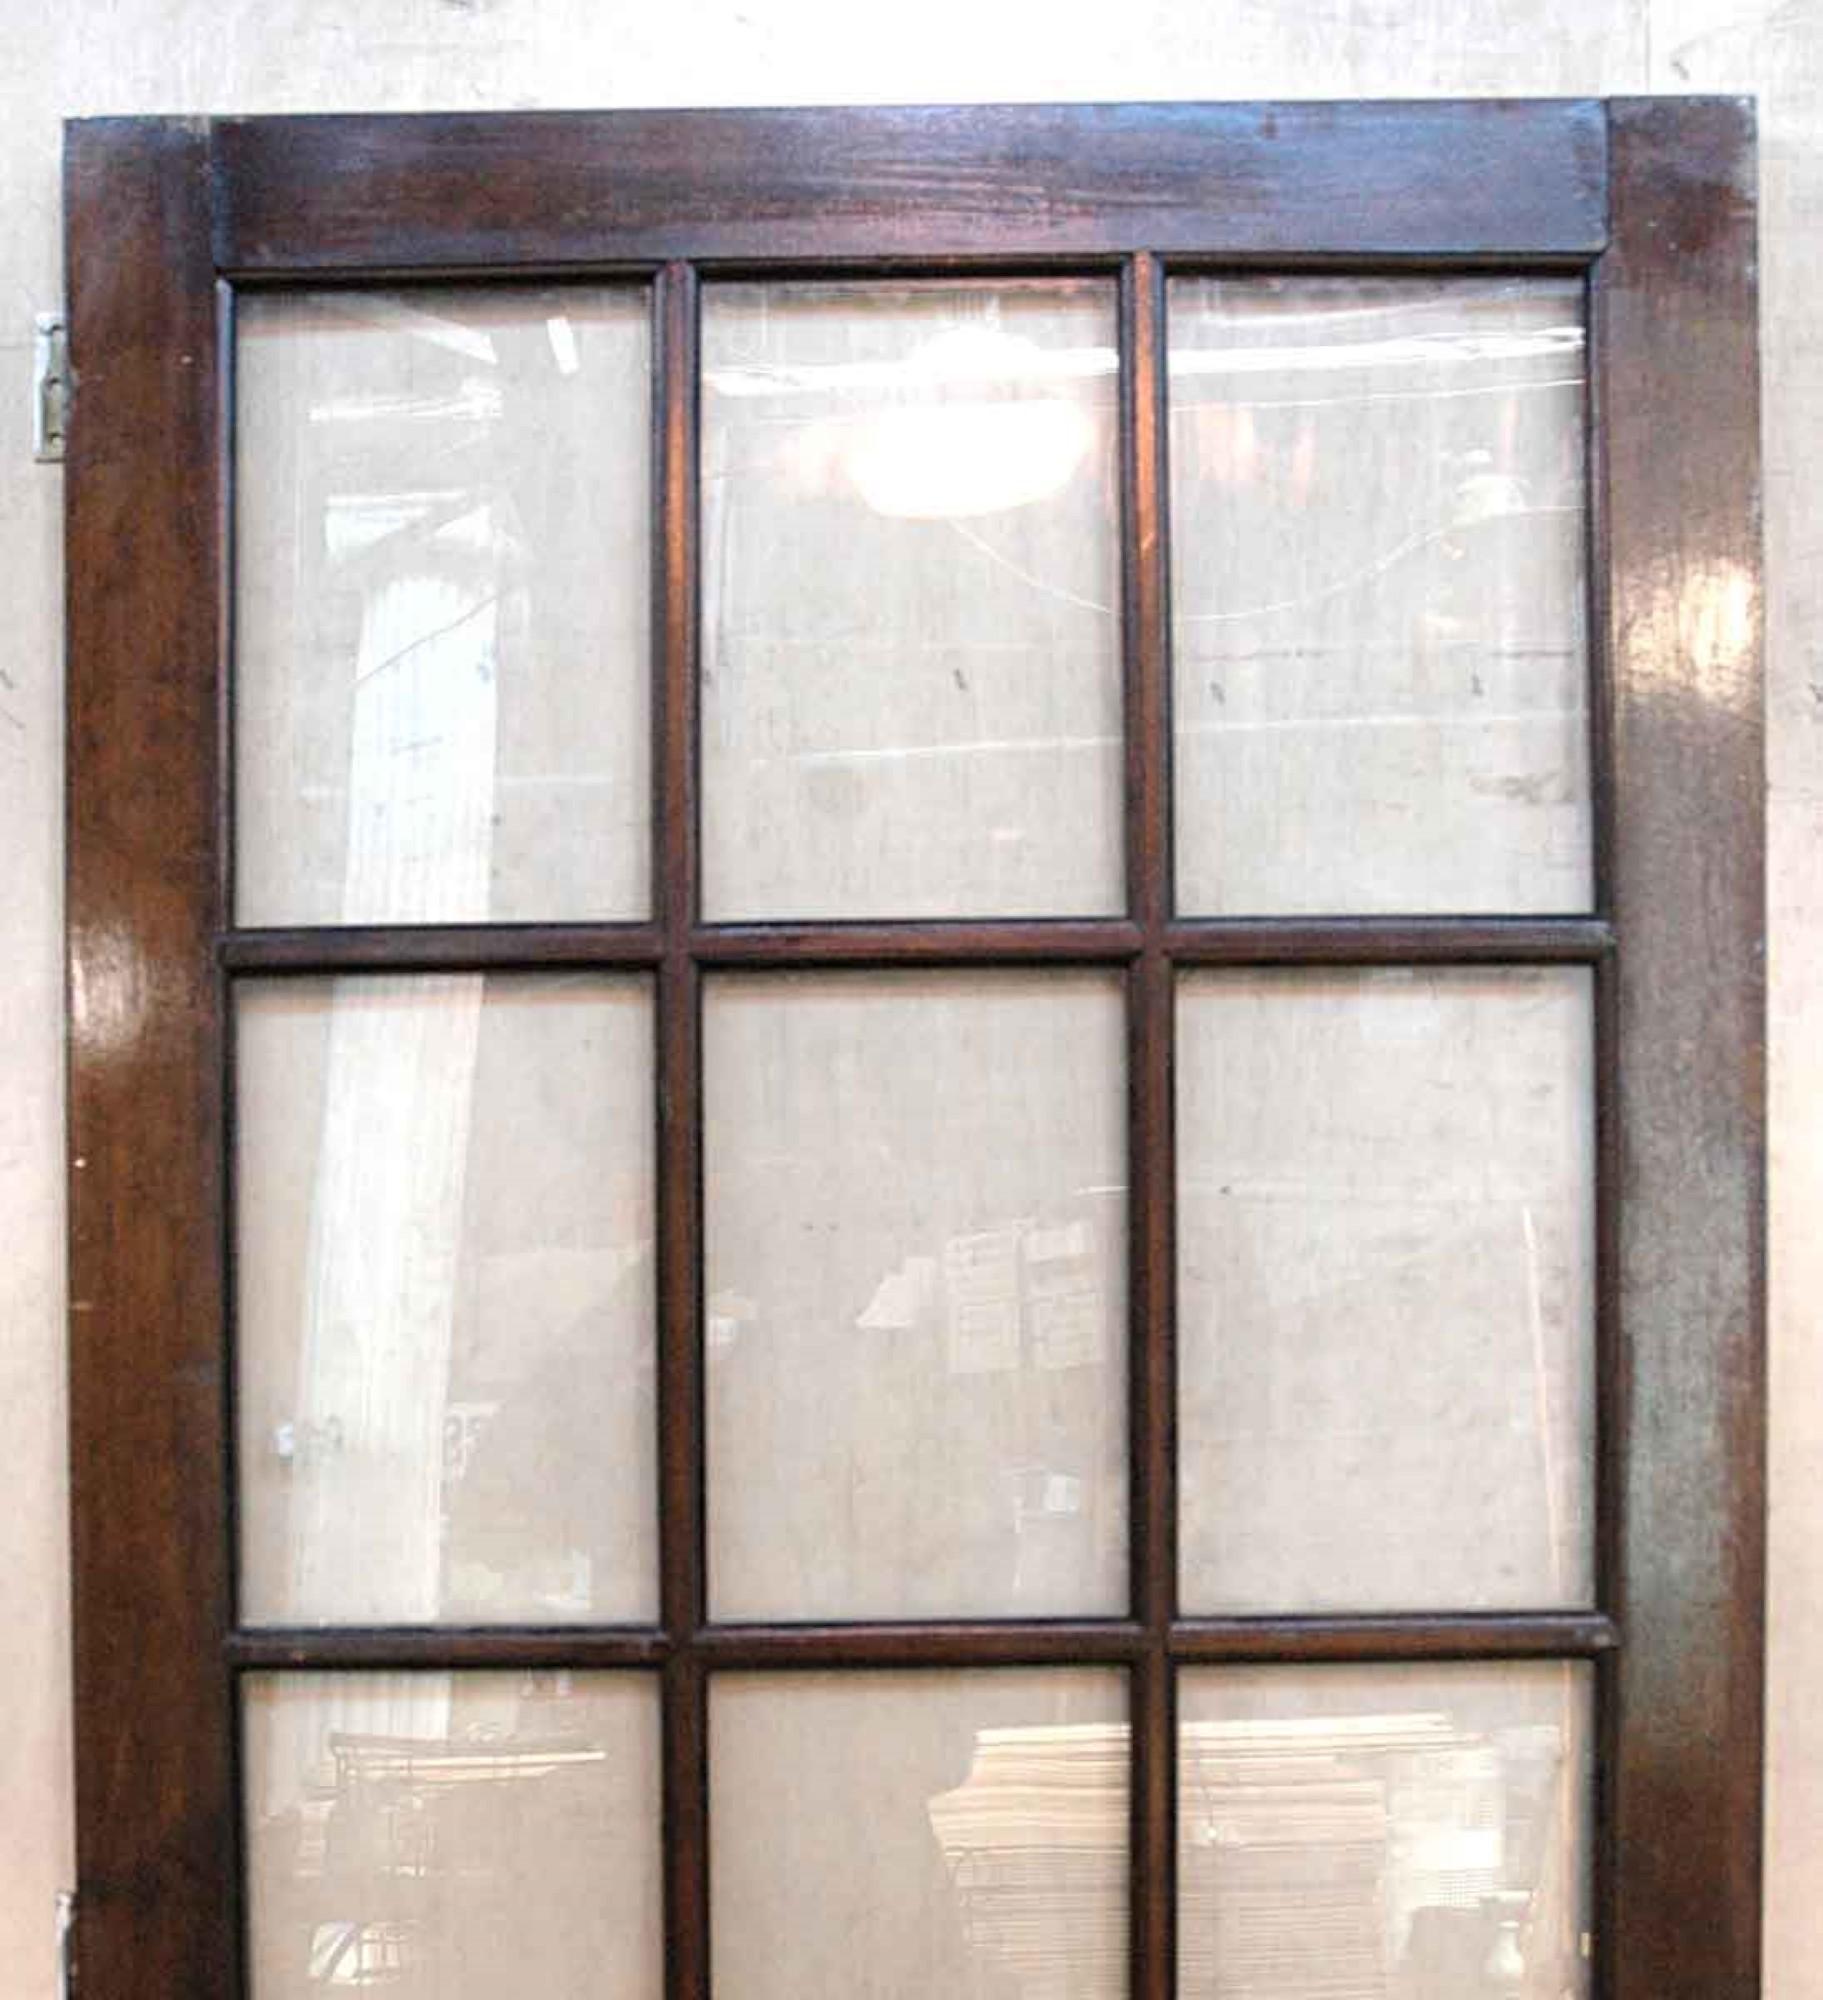 1940s birch right hand French door with 15 lites done in a dark stain. Comes with three brass hinges. This can be seen at our 400 Gilligan St location in Scranton. PA.